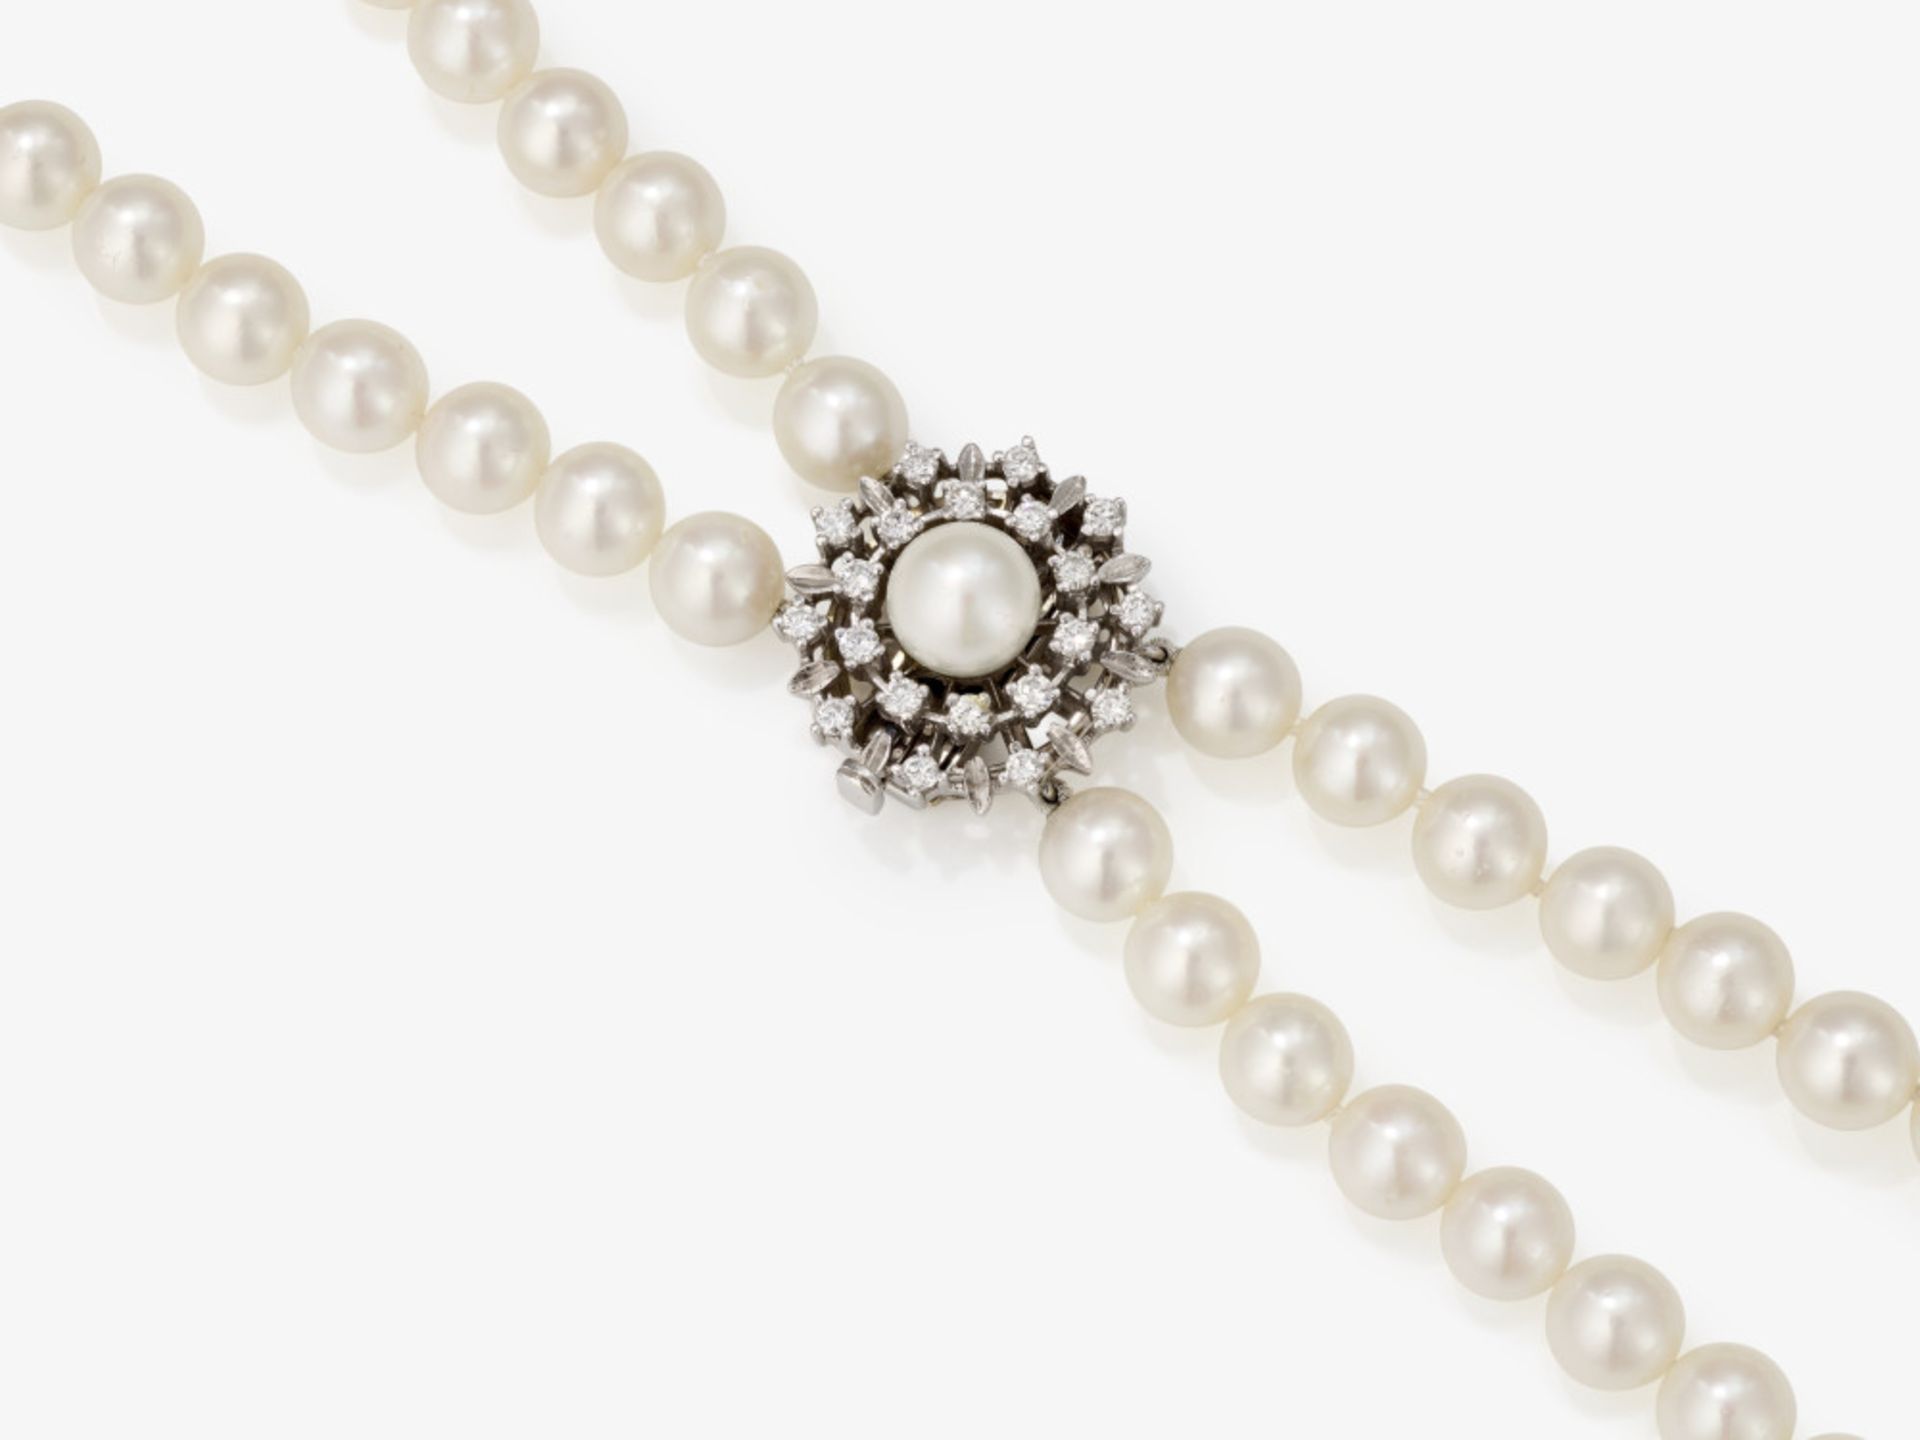 A 2-strand Akoya cultured pearl necklace with brilliant-cut diamond clasp - Germany, 1960s-1970s